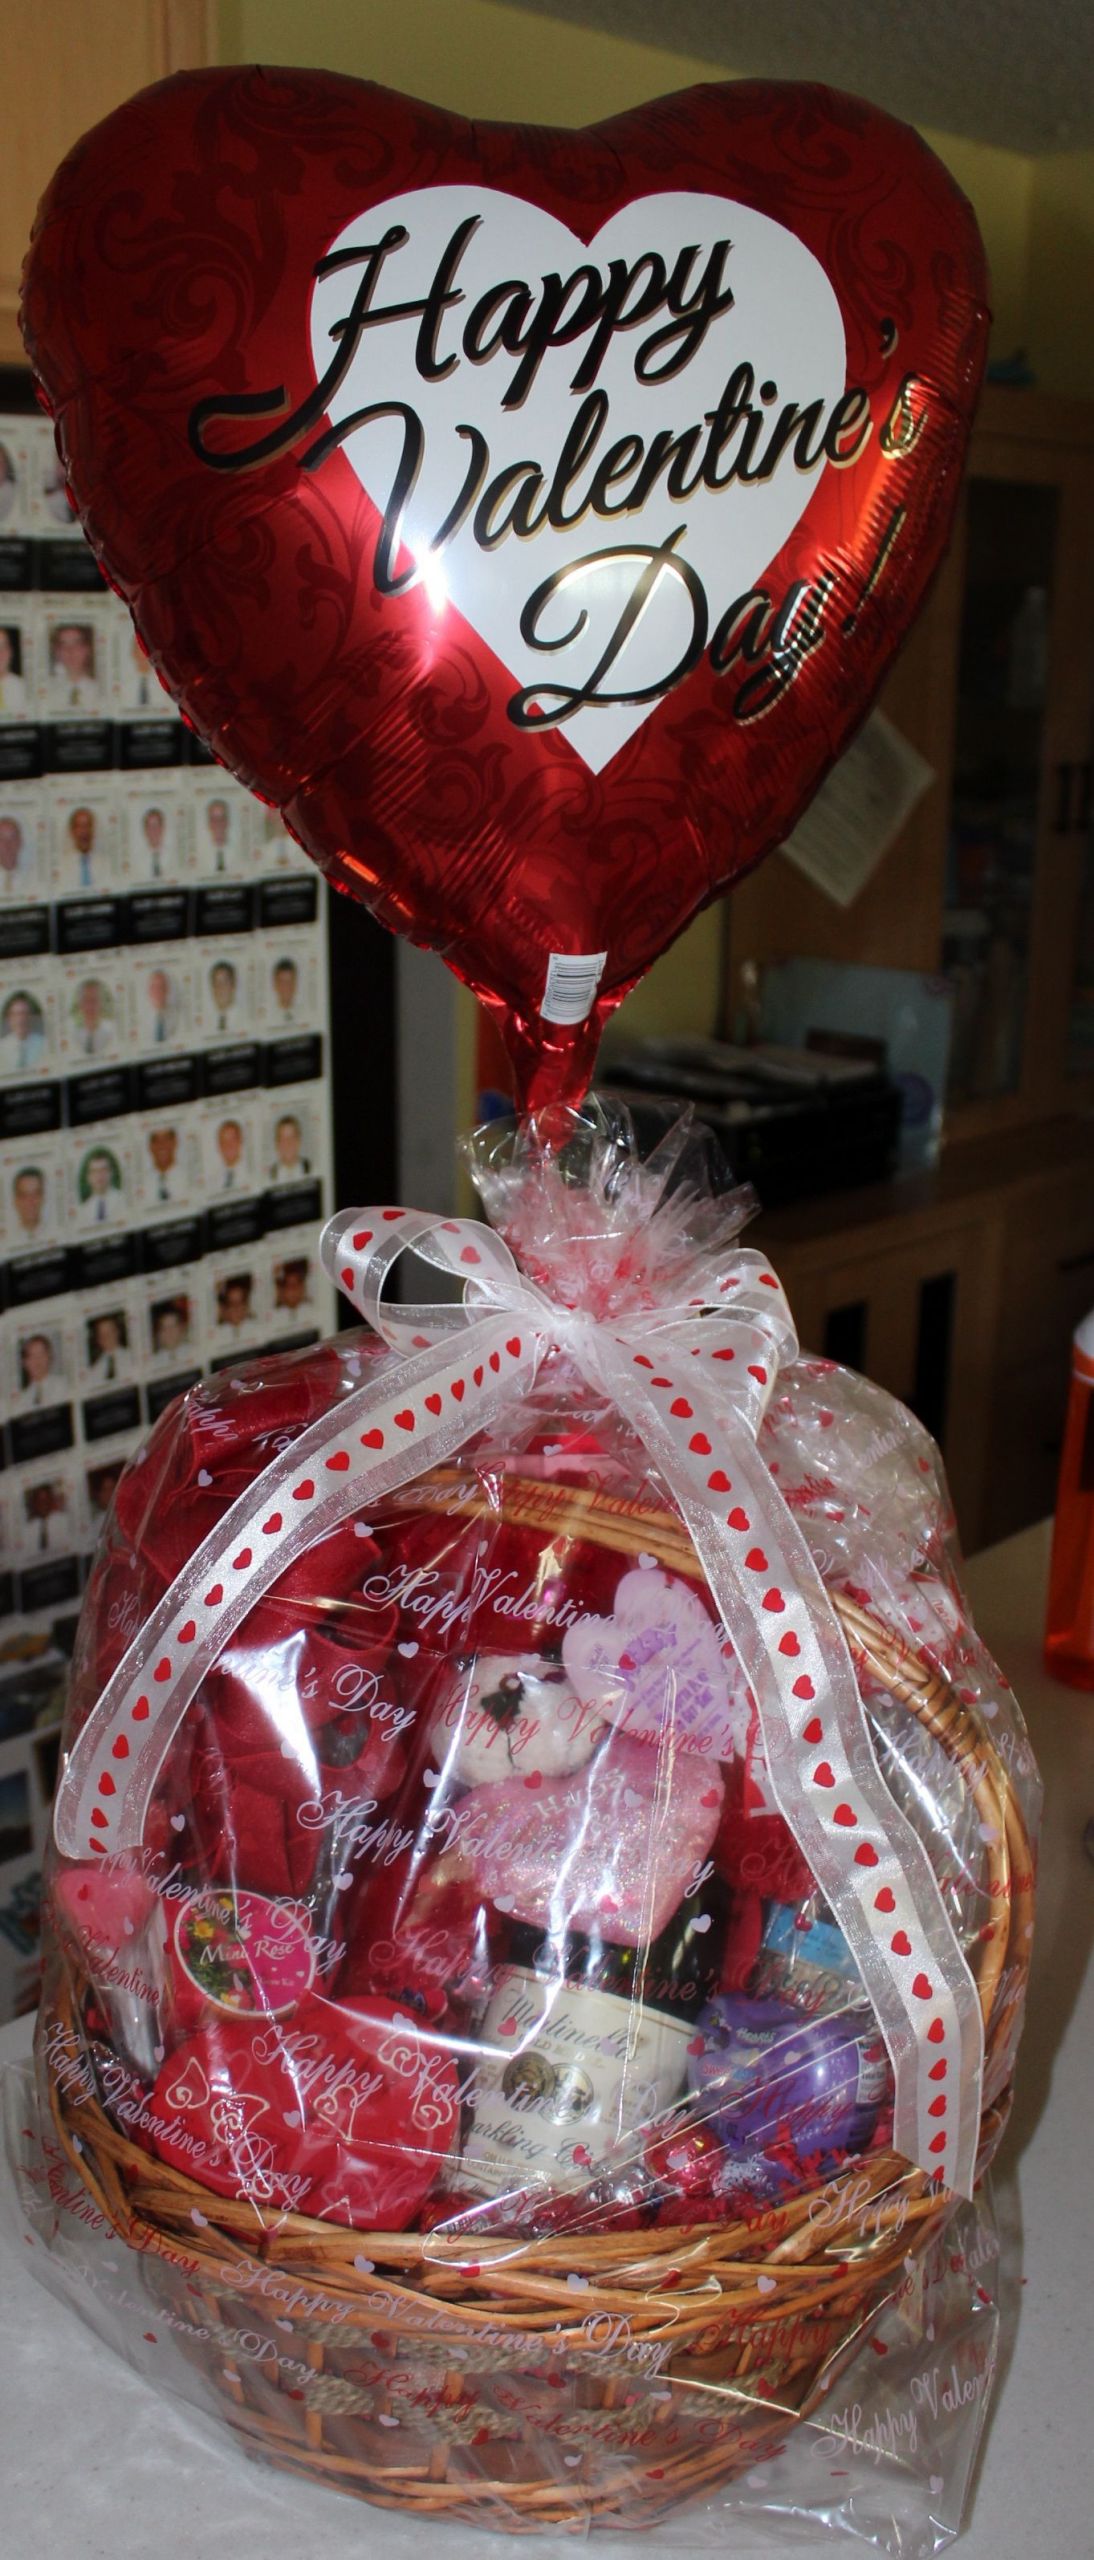 Valentine Day Gift Ideas For Women
 47 How To Make A Valentine Gift Basket For Her Best Idea